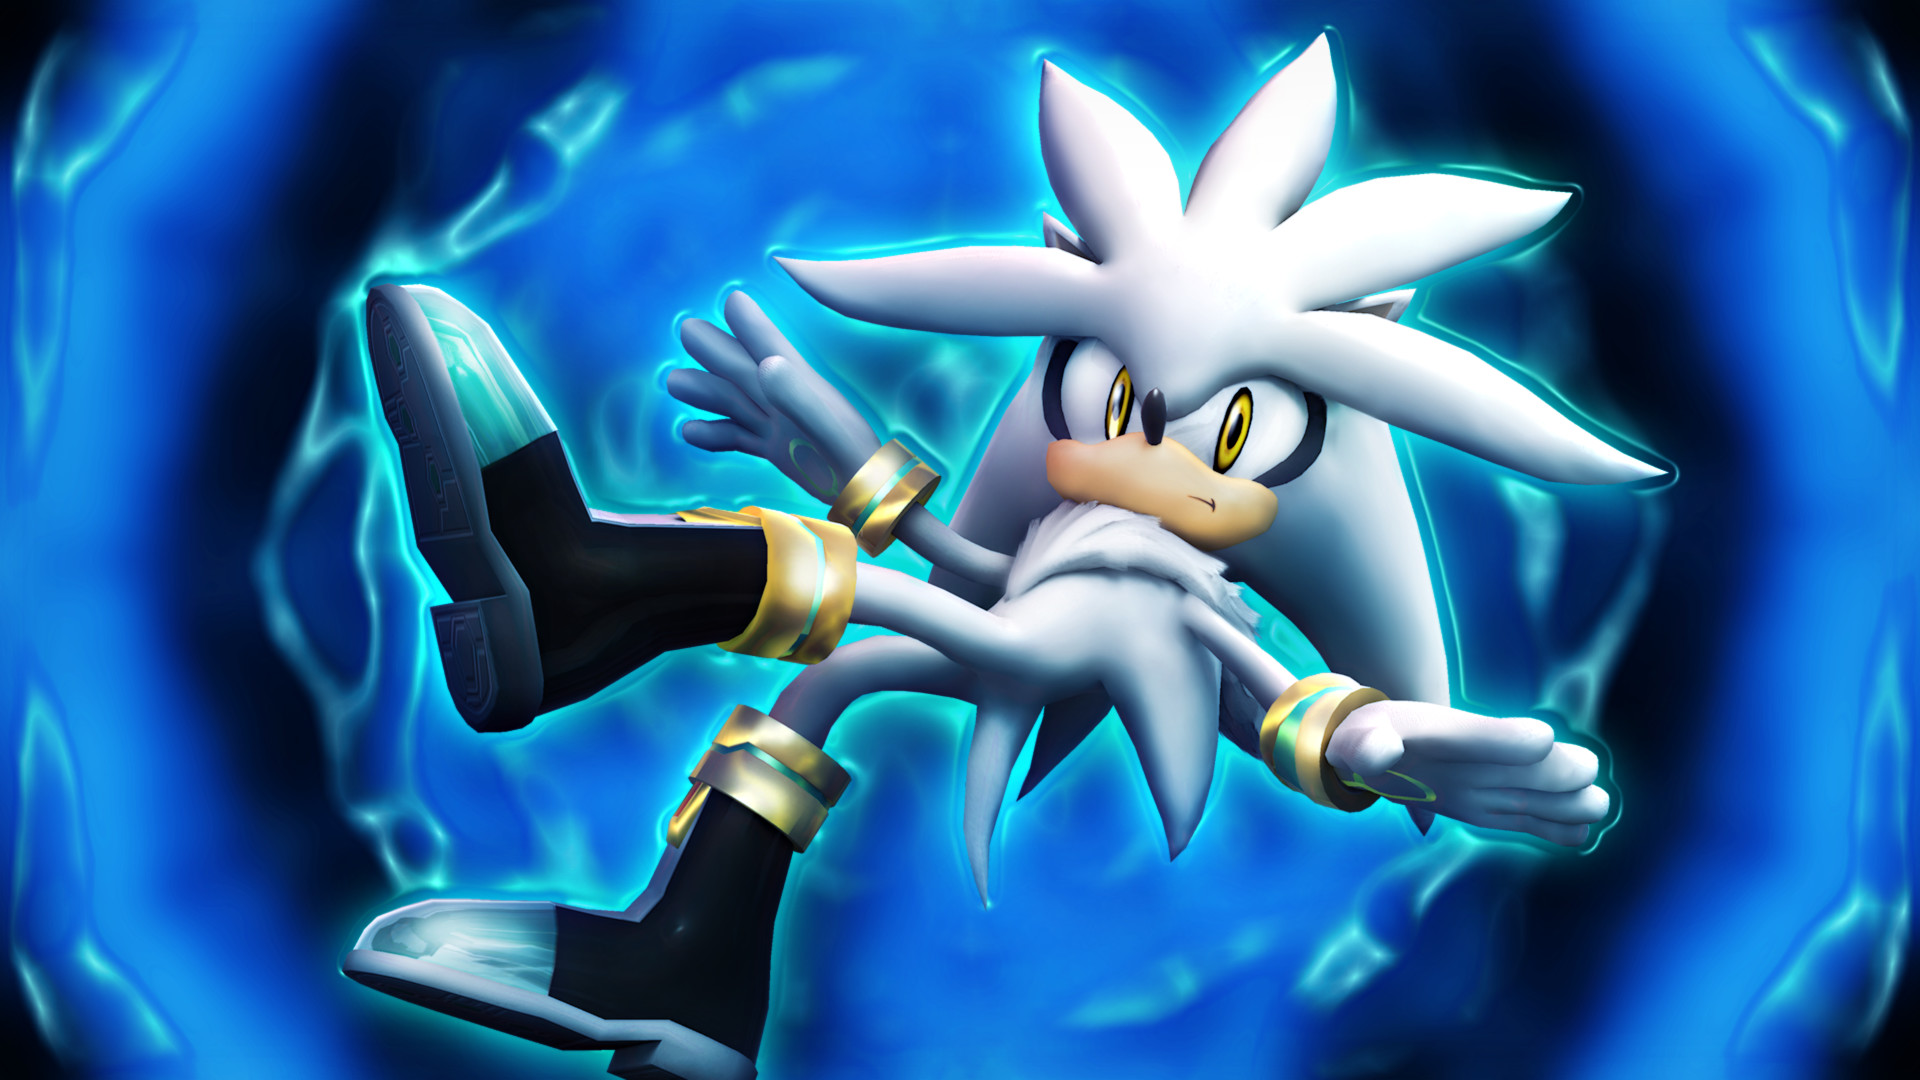 1920x1080 ... Silver the Hedgehog [900] by Light-Rock